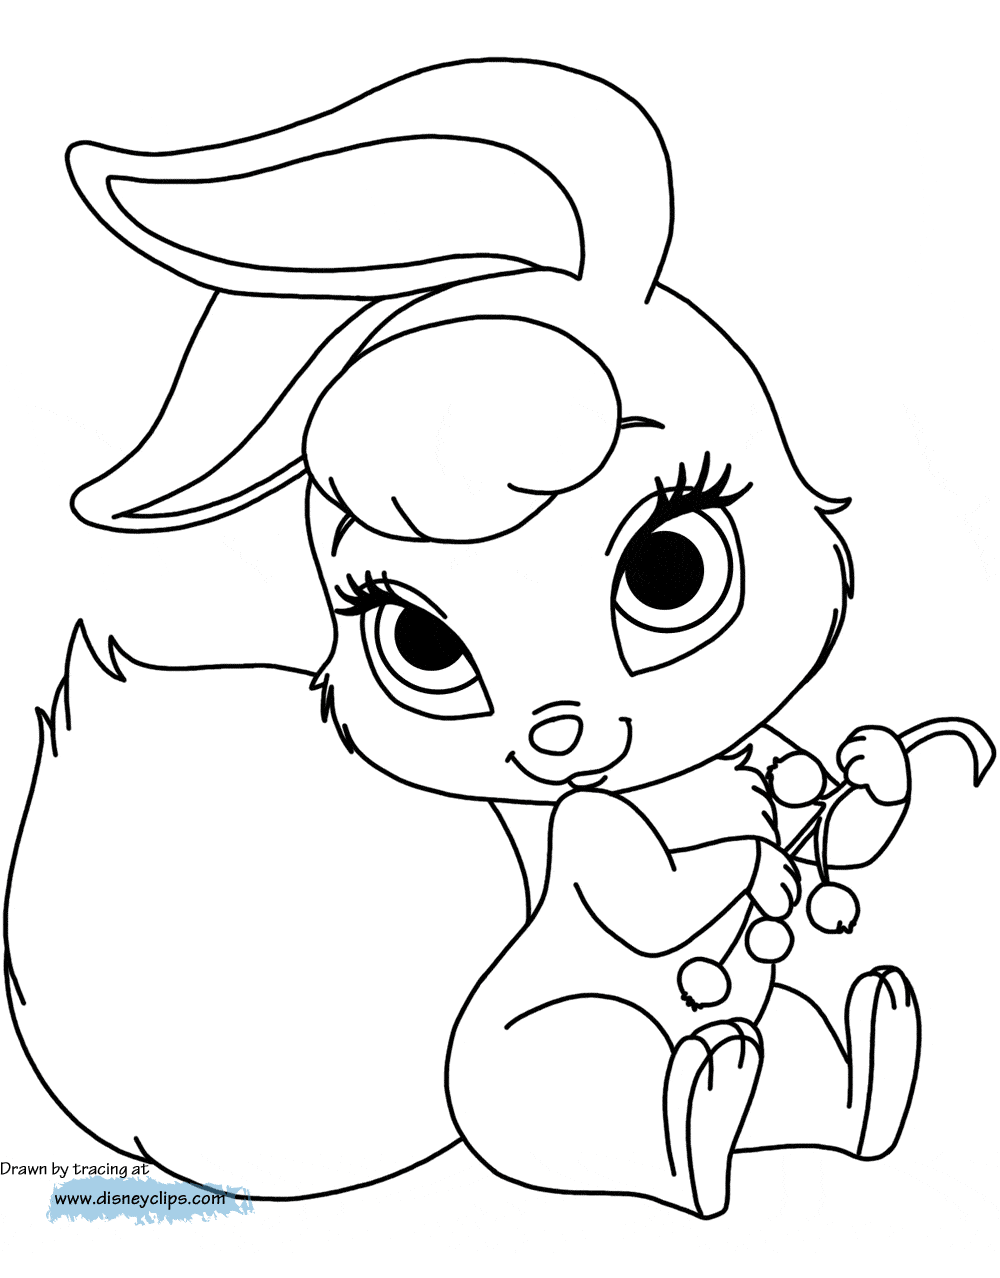 pet colouring pets coloring pages best coloring pages for kids pet colouring 